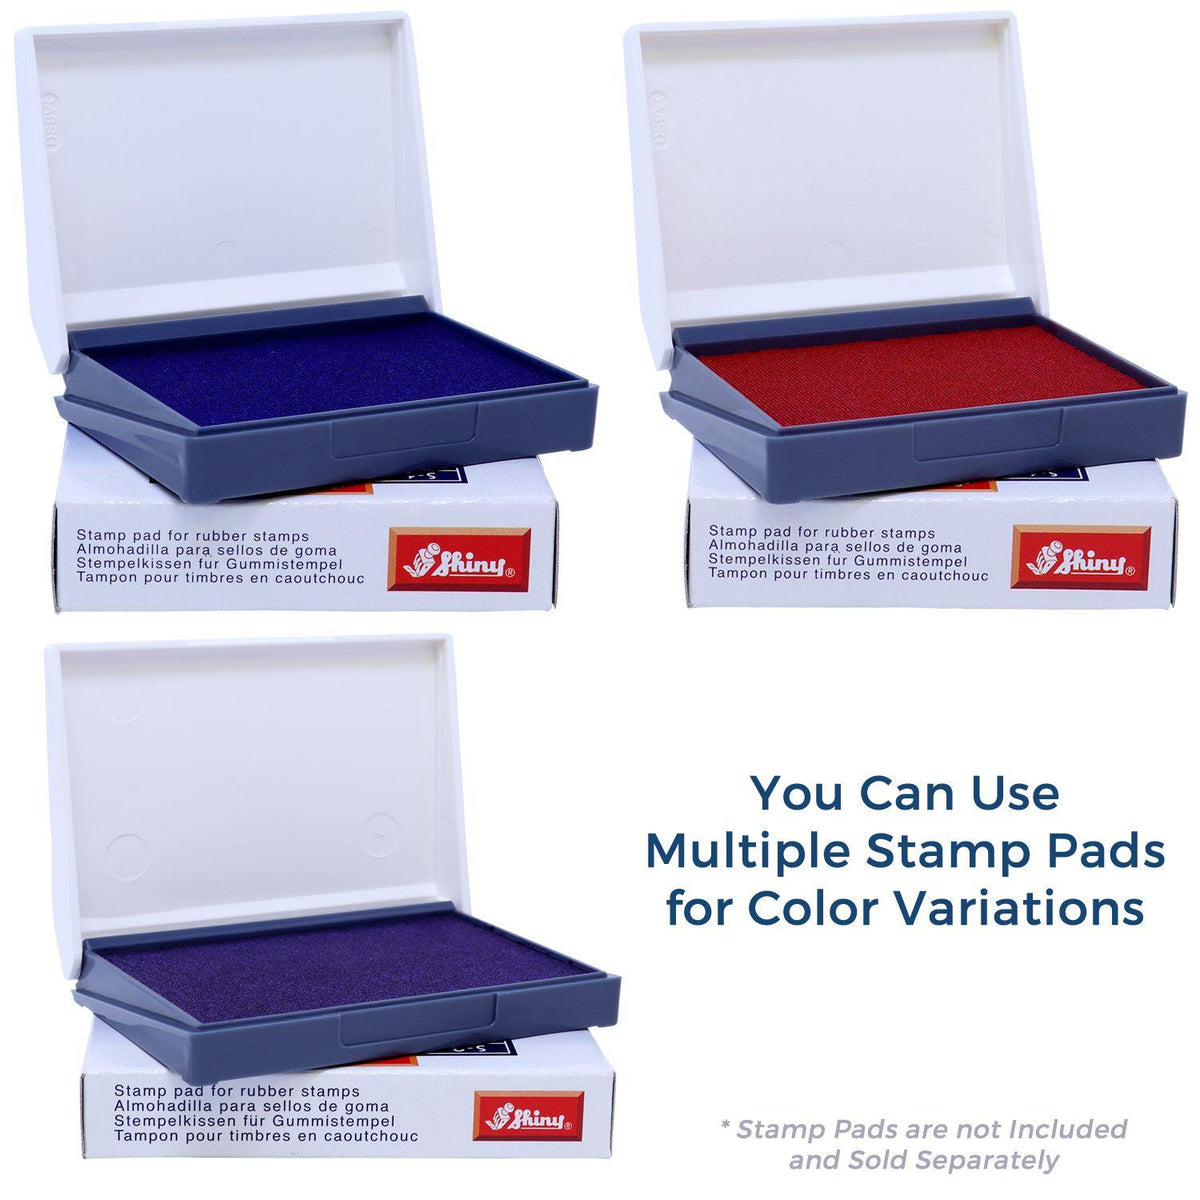 Stamp Pads for Large Please Forward Insurance Form Rubber Stamp Available